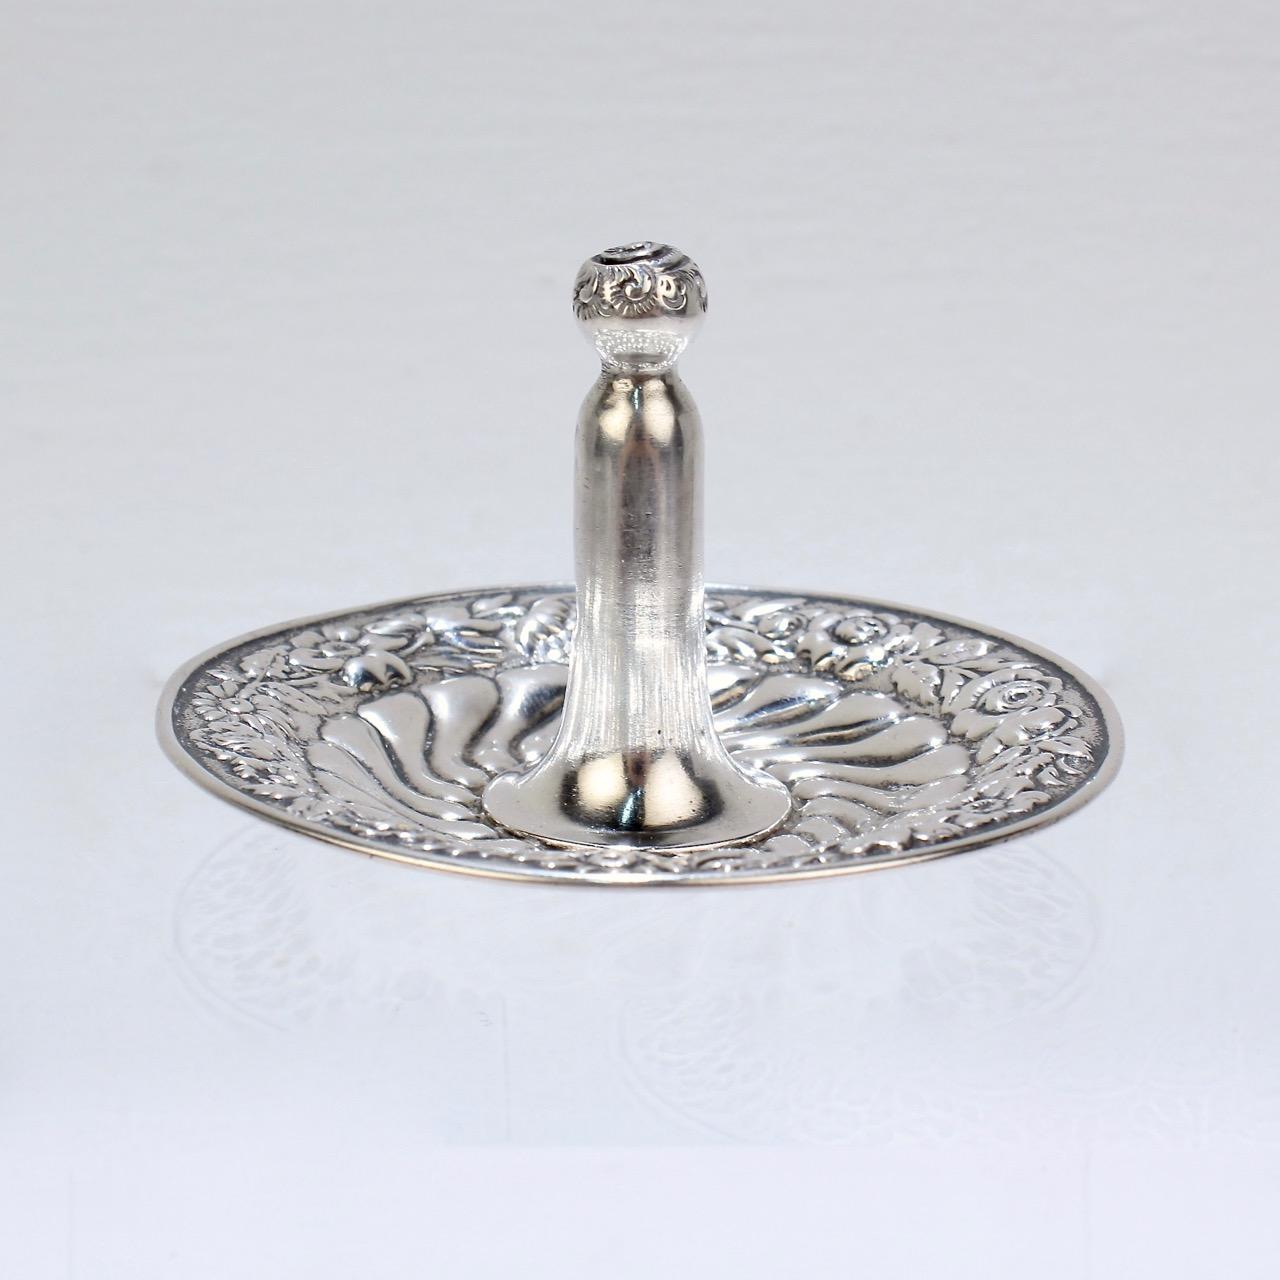 A fine, antique American sterling silver ring stand. 

With floral repousse decoration to the edge and finial and fluted decoration to the base. A streamlined variant of a 'ring tree', this ring stand has one central stand -- singular and